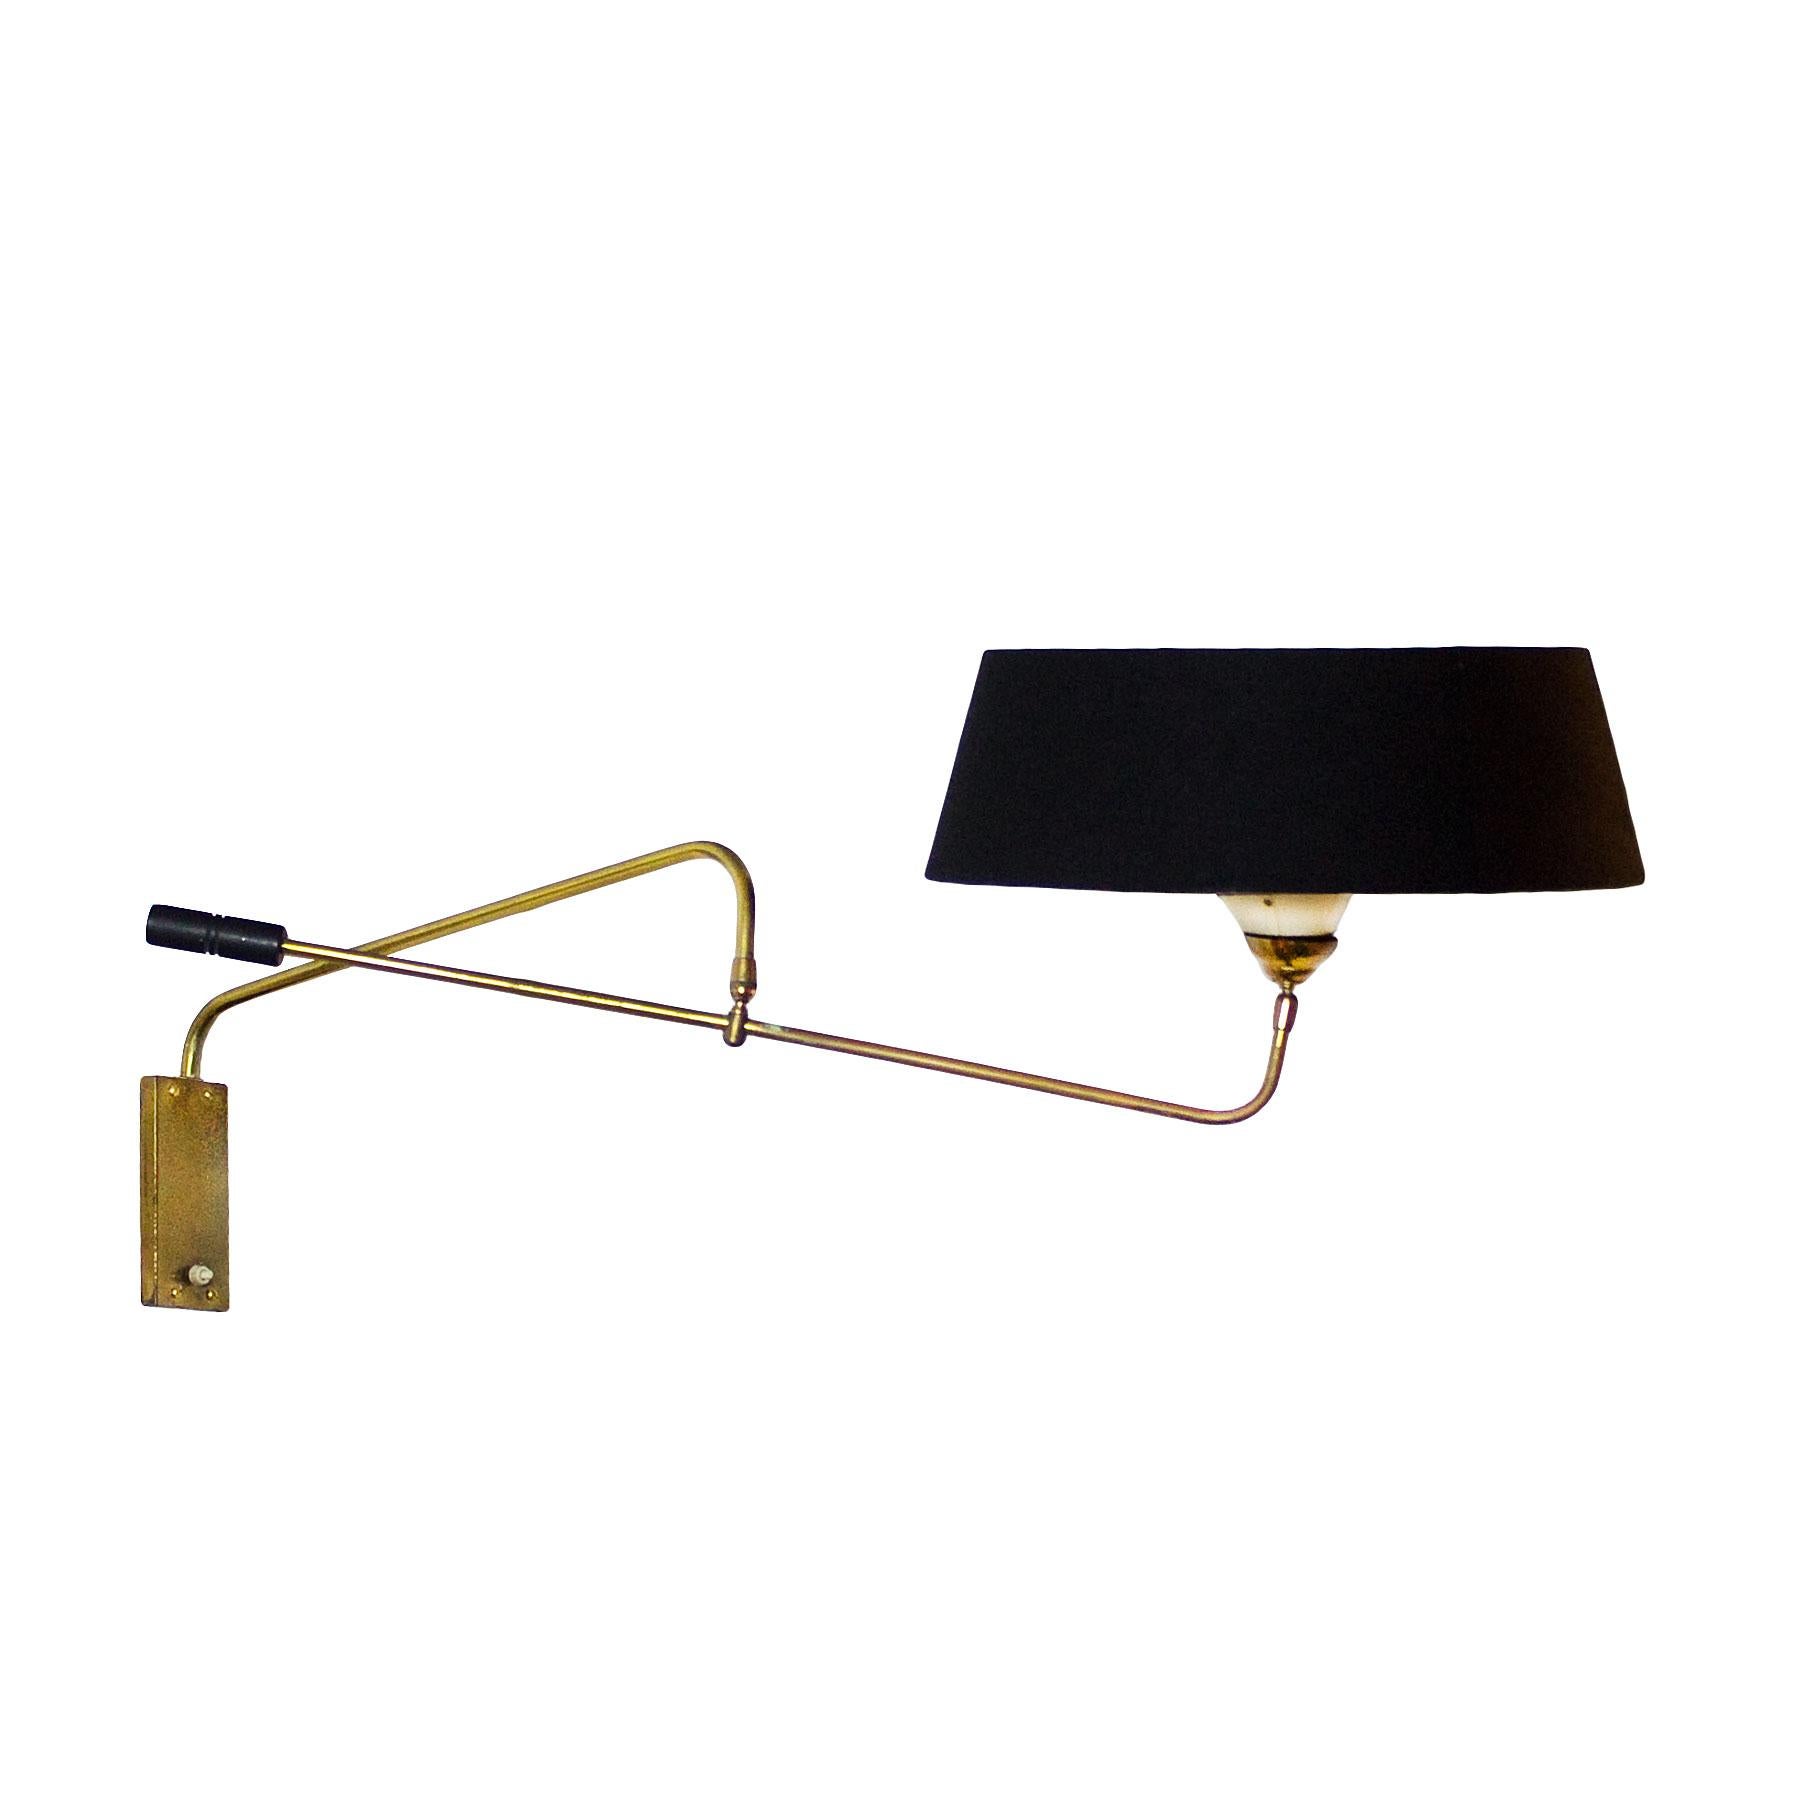 Big wall light with solid brass multidirectional oscillating arm, blackened steel counterweight. Perspex diffuser and new black and golden lampshade.
Maker: Maison Lunel.
France, circa 1950.

Lampshade: Diameter 42 cm.
   